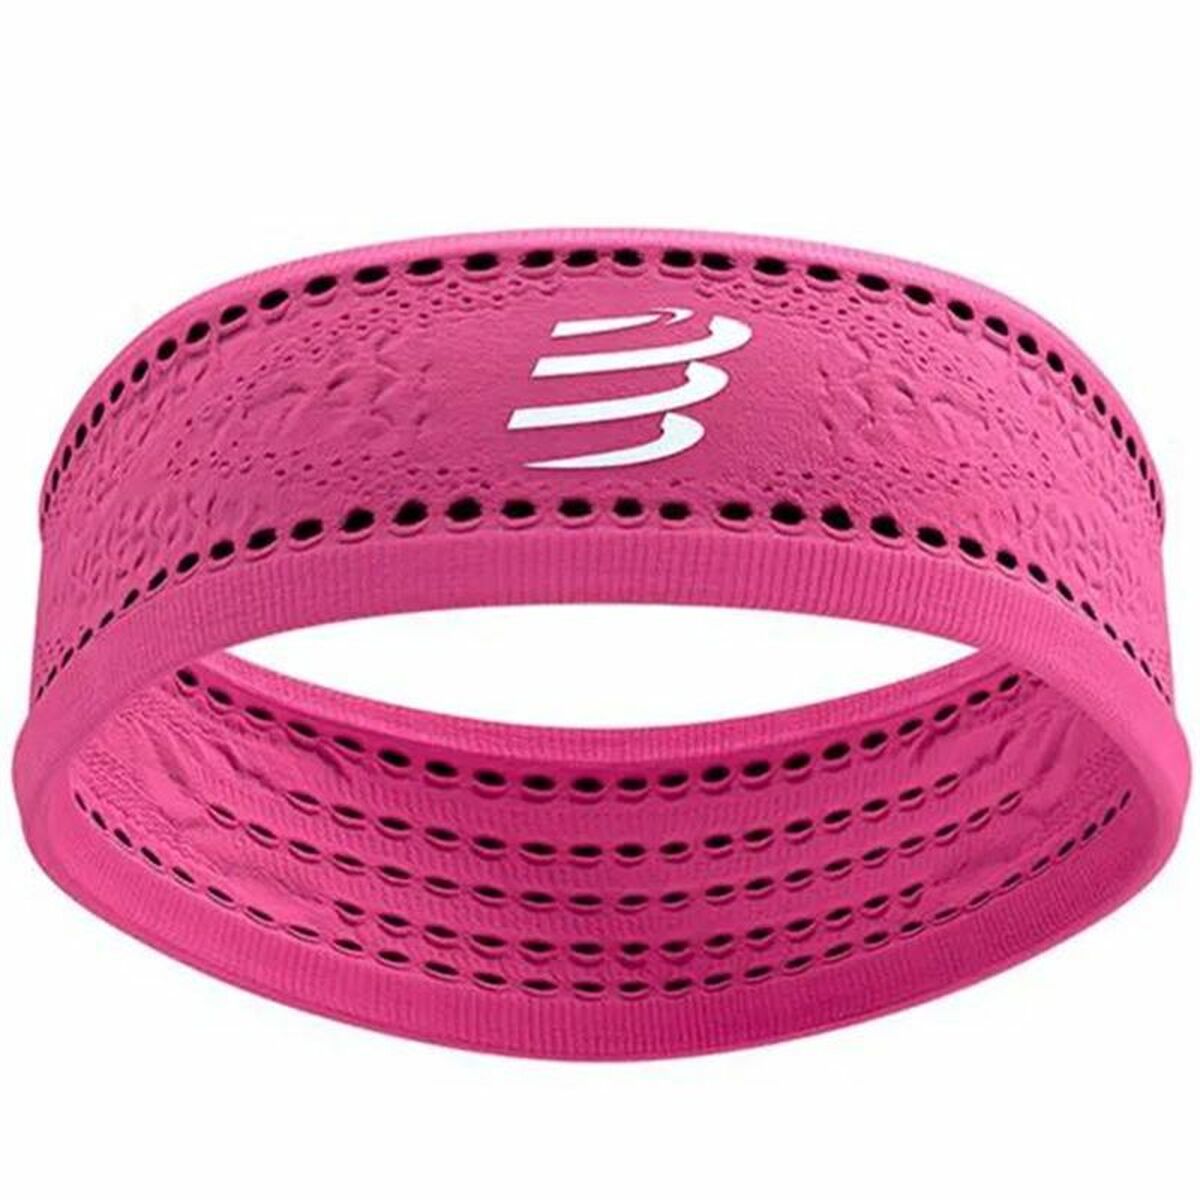 Sports Strip for the Head Compressport Thin On/Off Fuchsia Pink